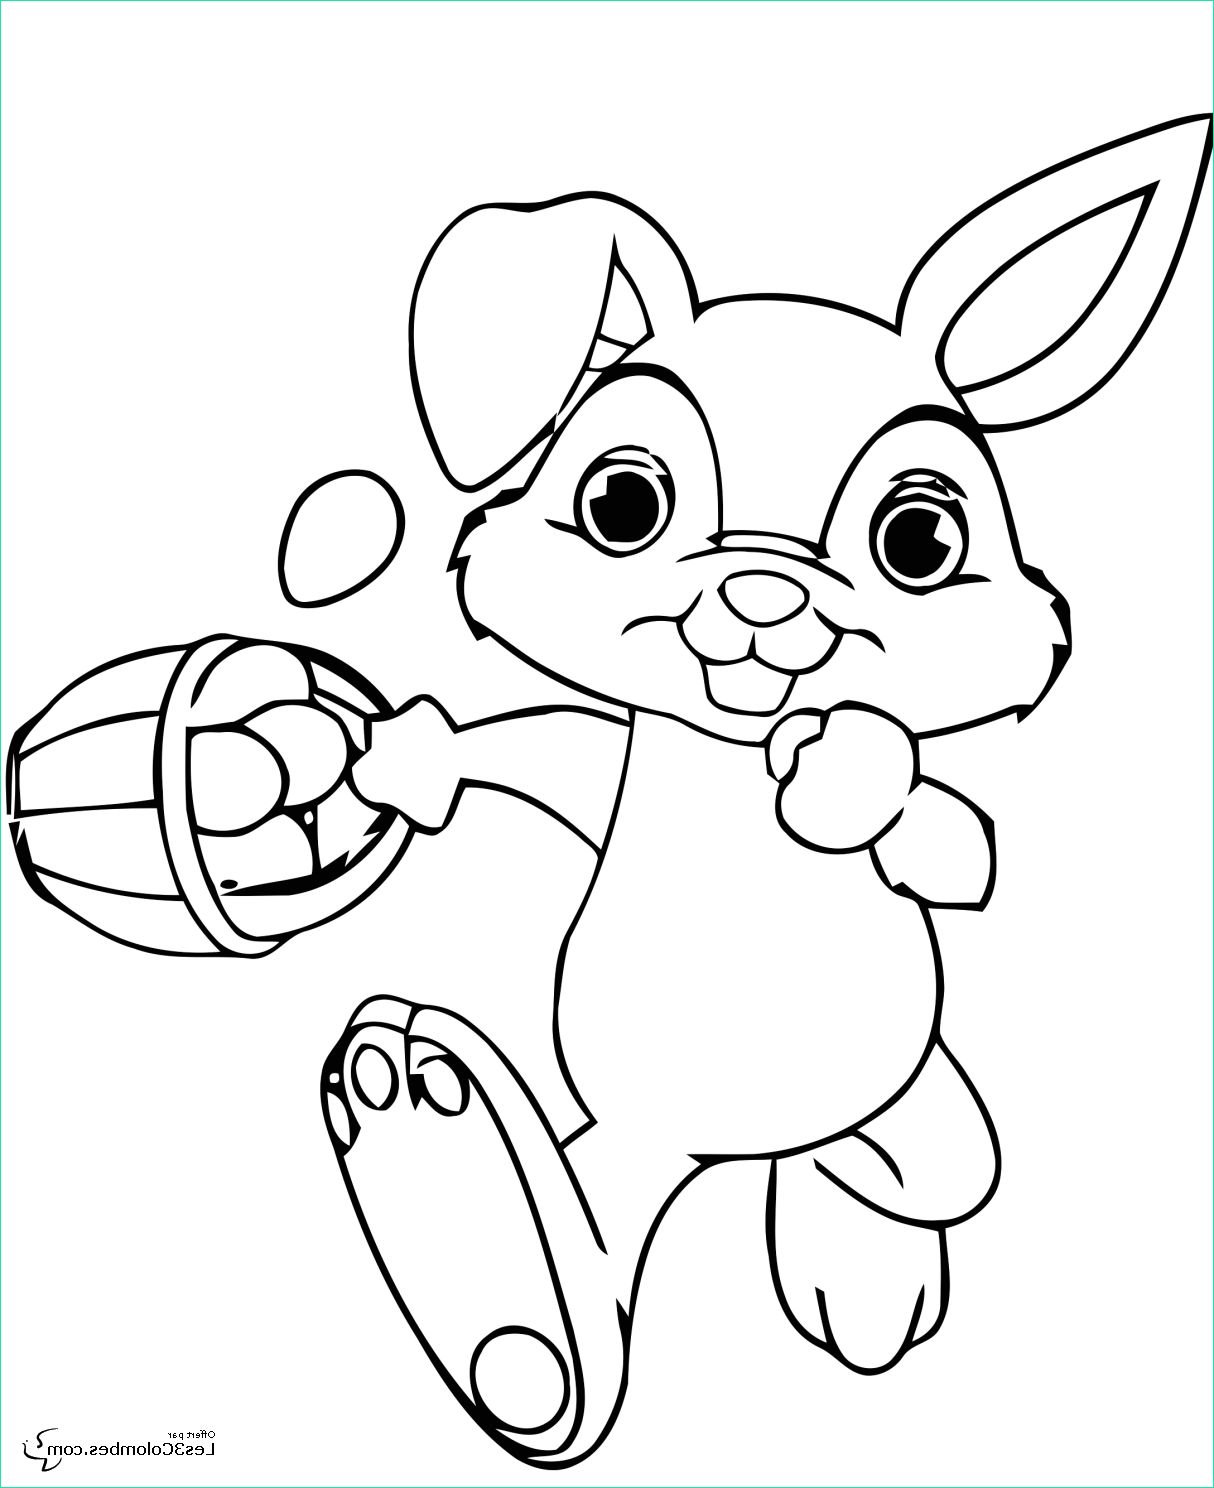 Coloriage Lapin Paques Bestof Collection Inspiration Coloriage Lapin De Paques Gratuit